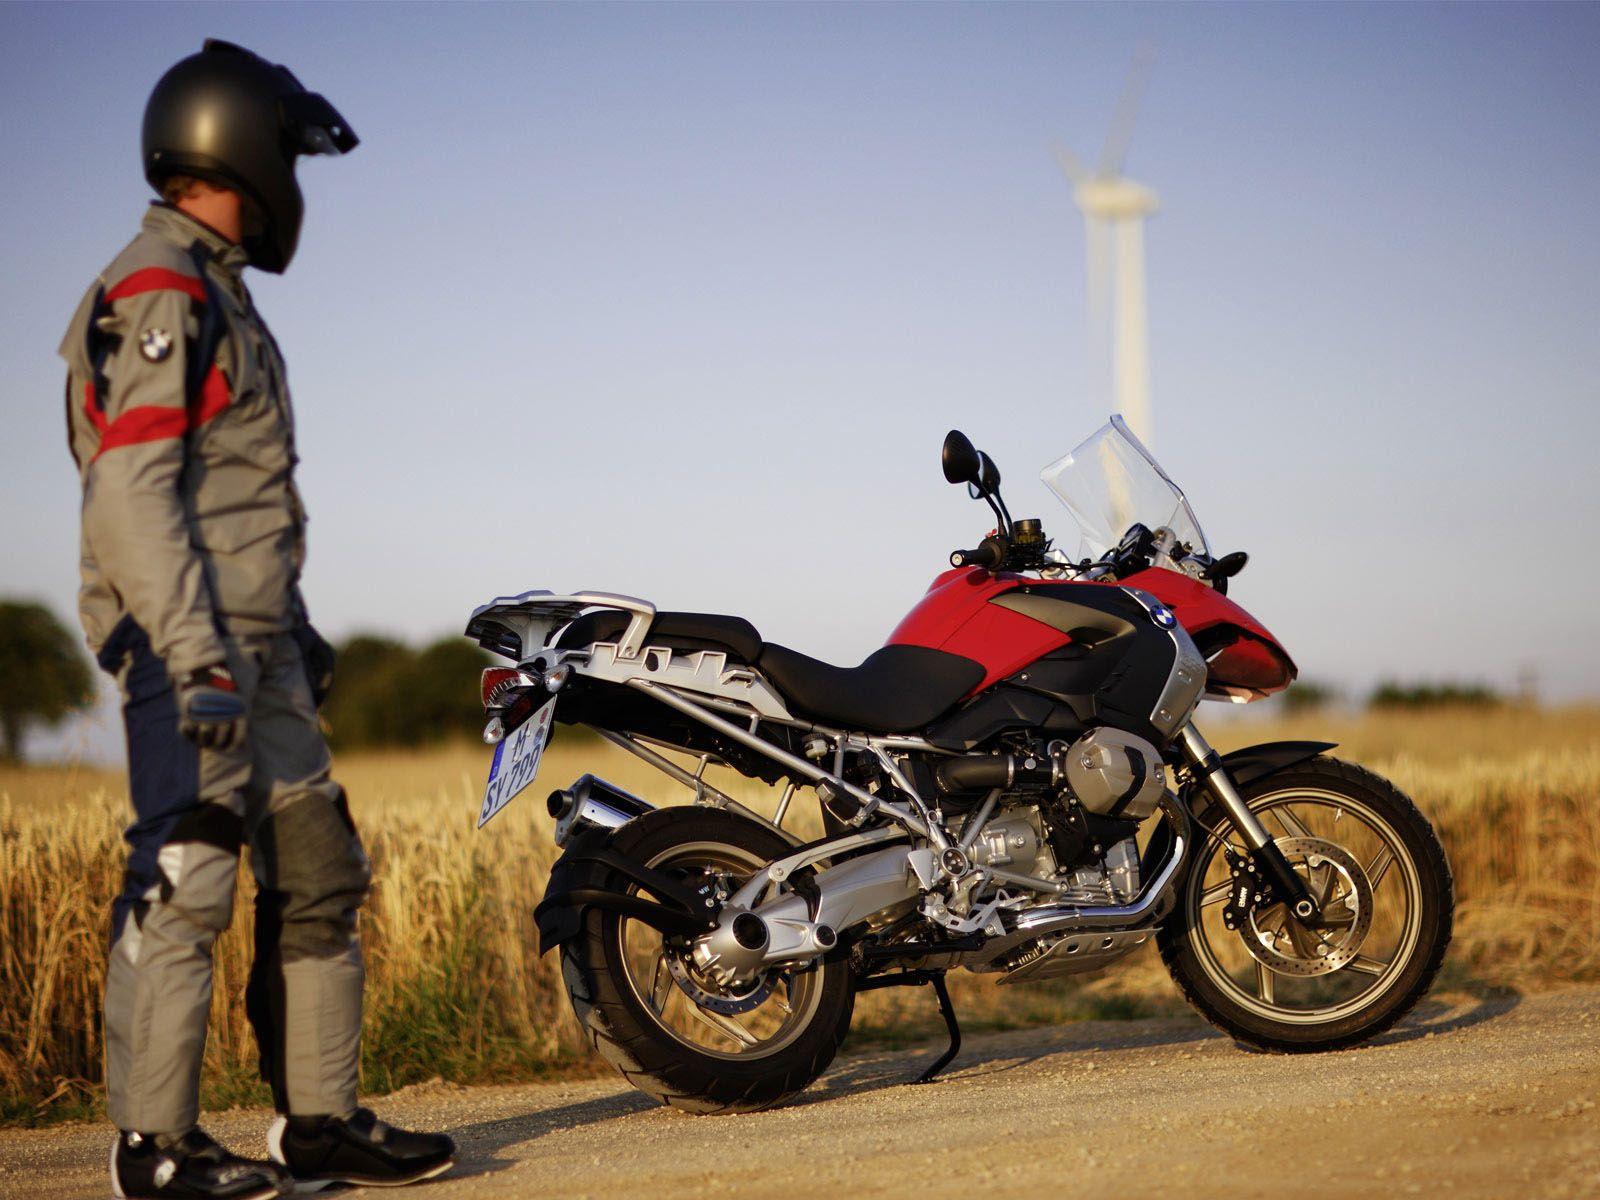 BMW R 1200 GS wallpaper and image, picture, photo